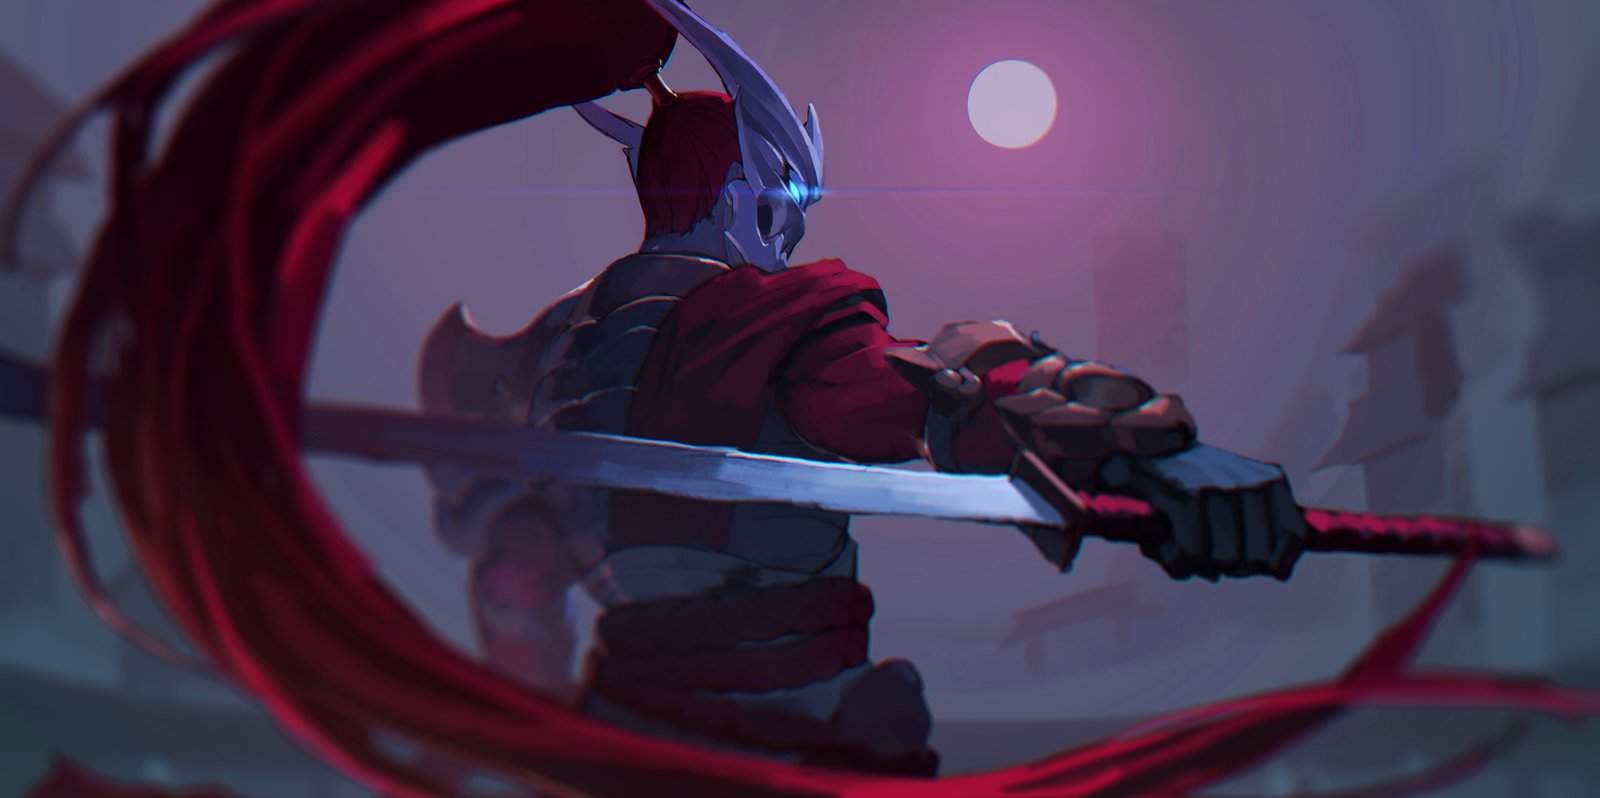 Blood Moon Yasuo Fan Art Search discover and share your favorite blood ...